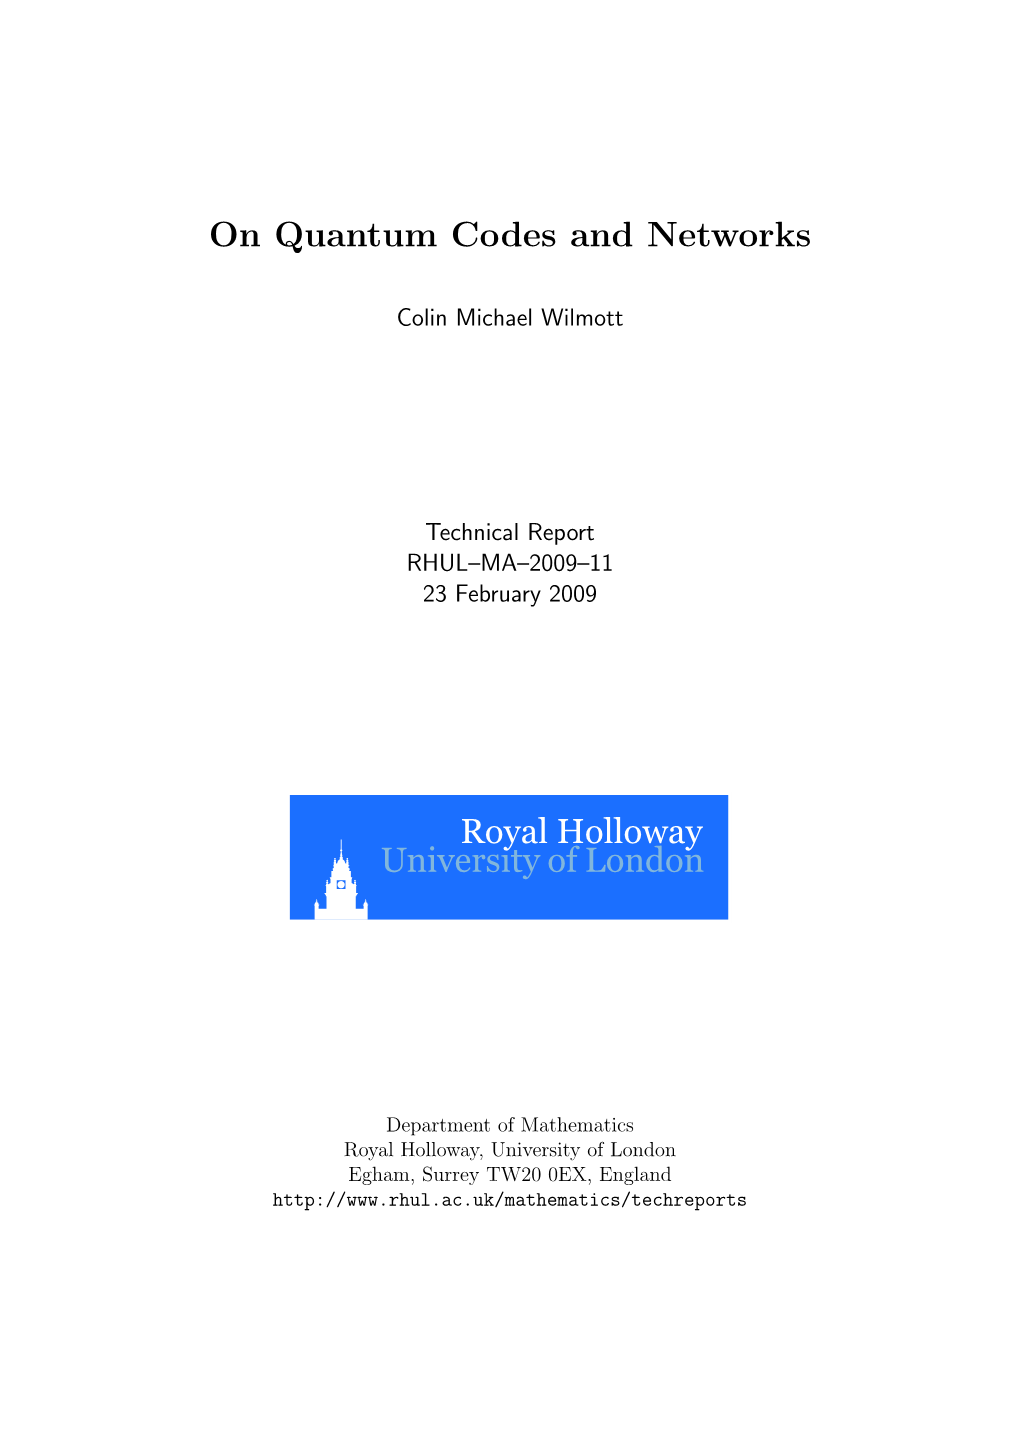 On Quantum Codes and Networks